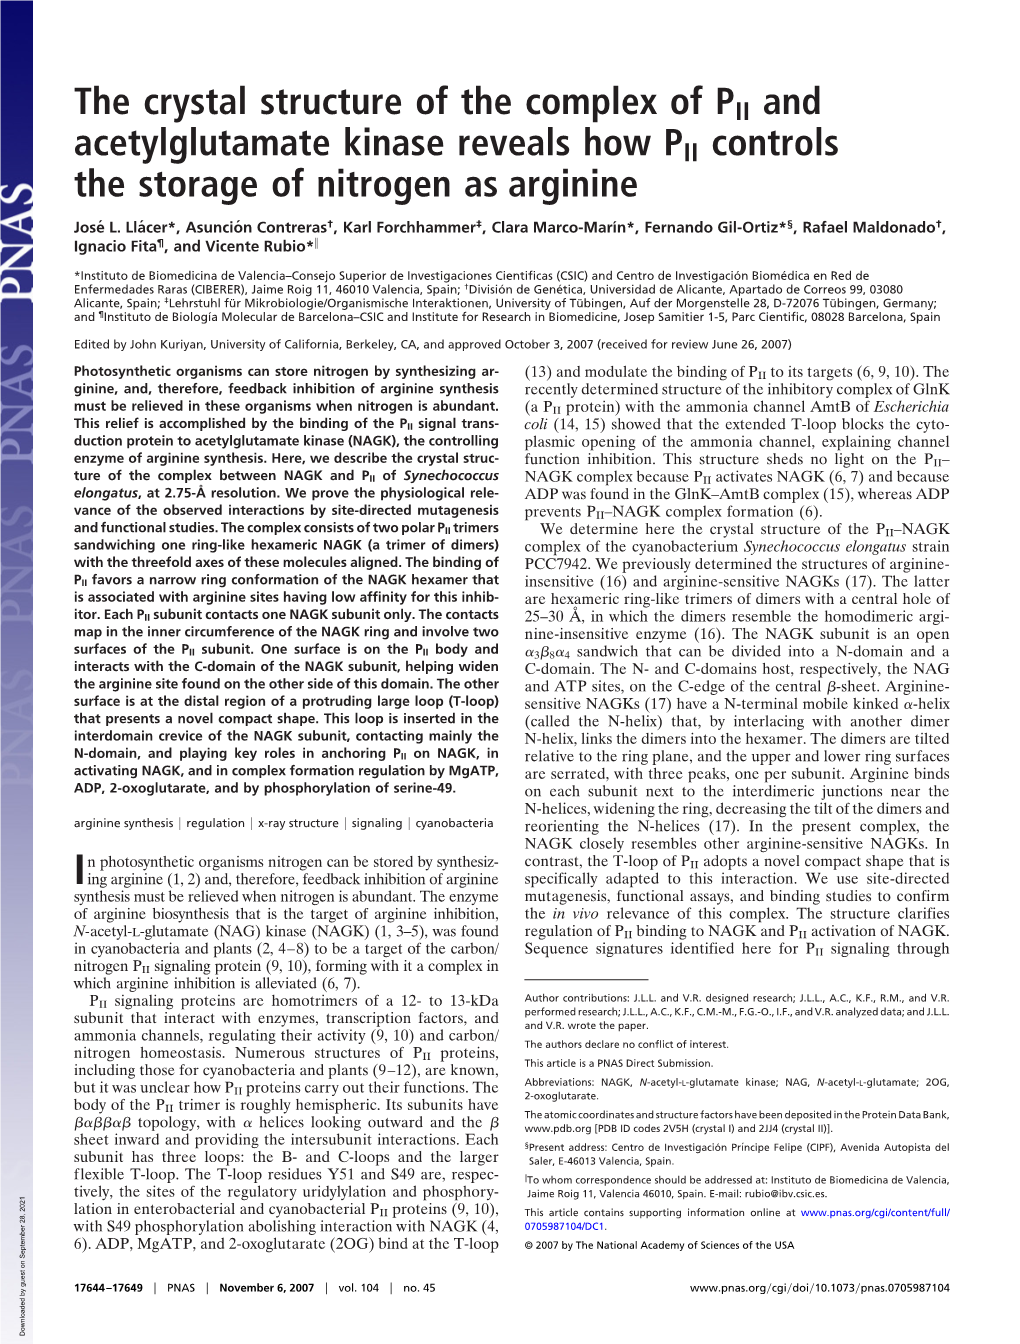 The Crystal Structure of the Complex of PII and Acetylglutamate Kinase Reveals How PII Controls the Storage of Nitrogen As Arginine